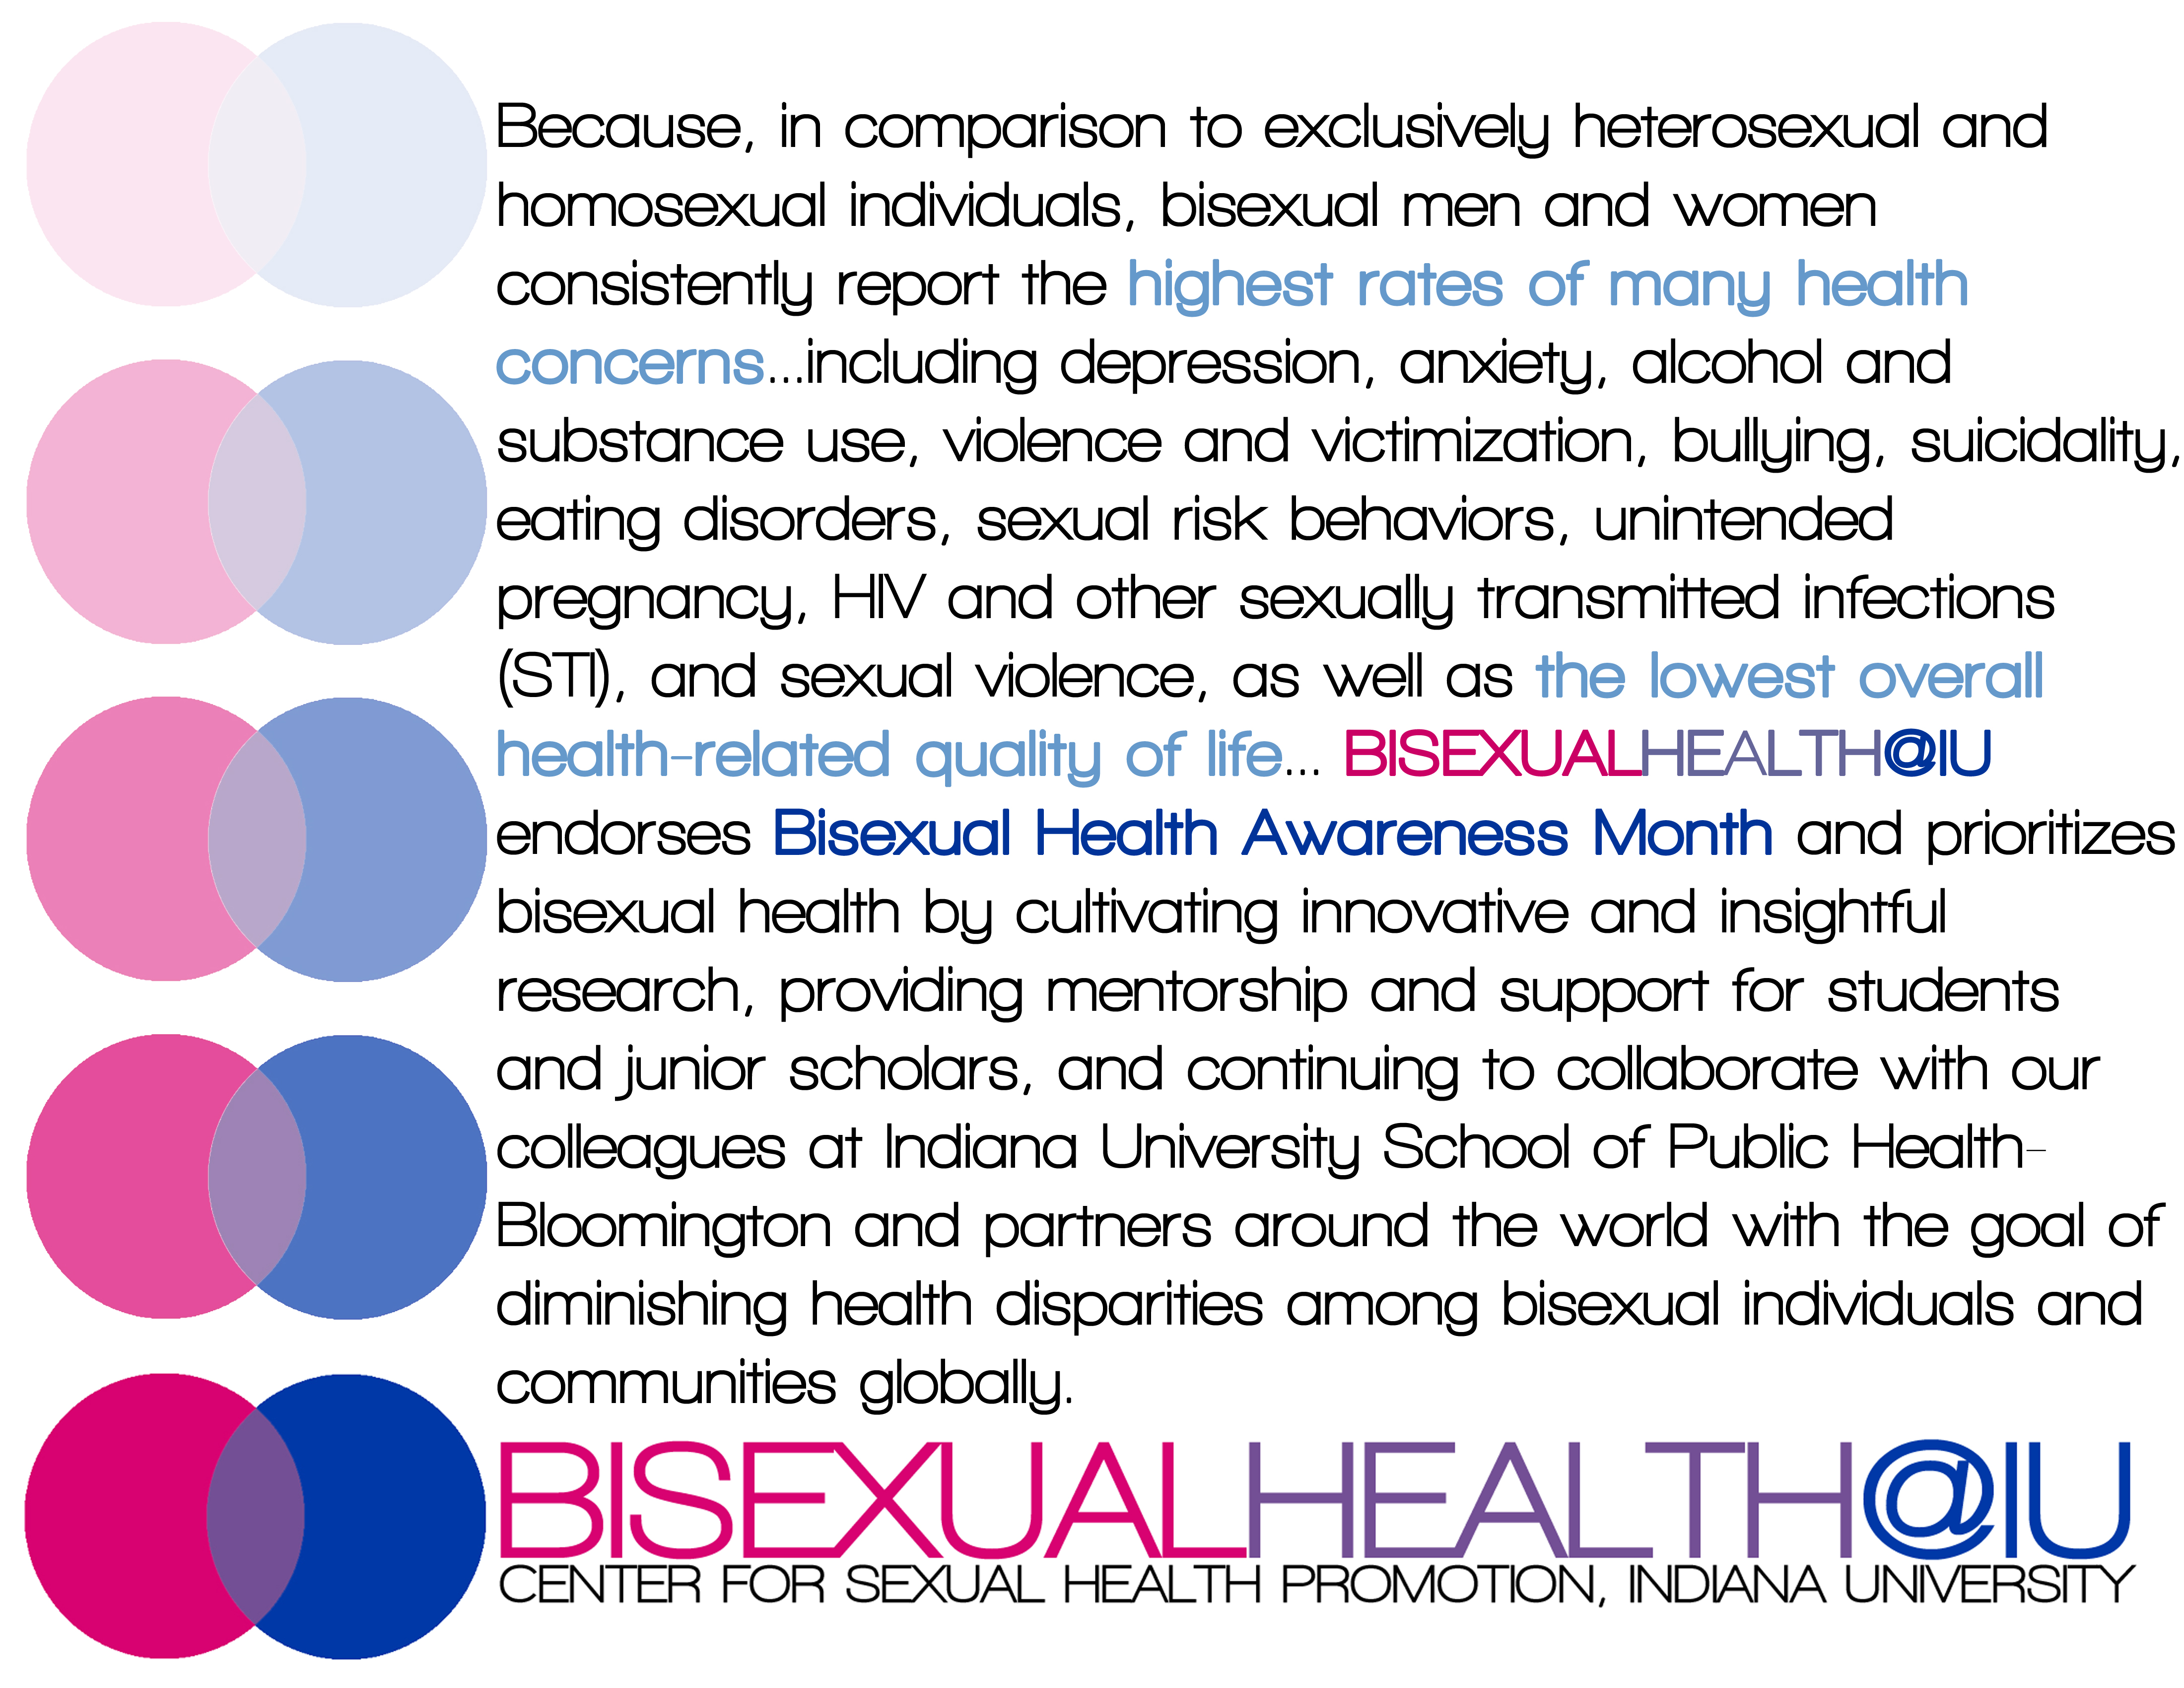 Bisexual Health IU Conference Information Image